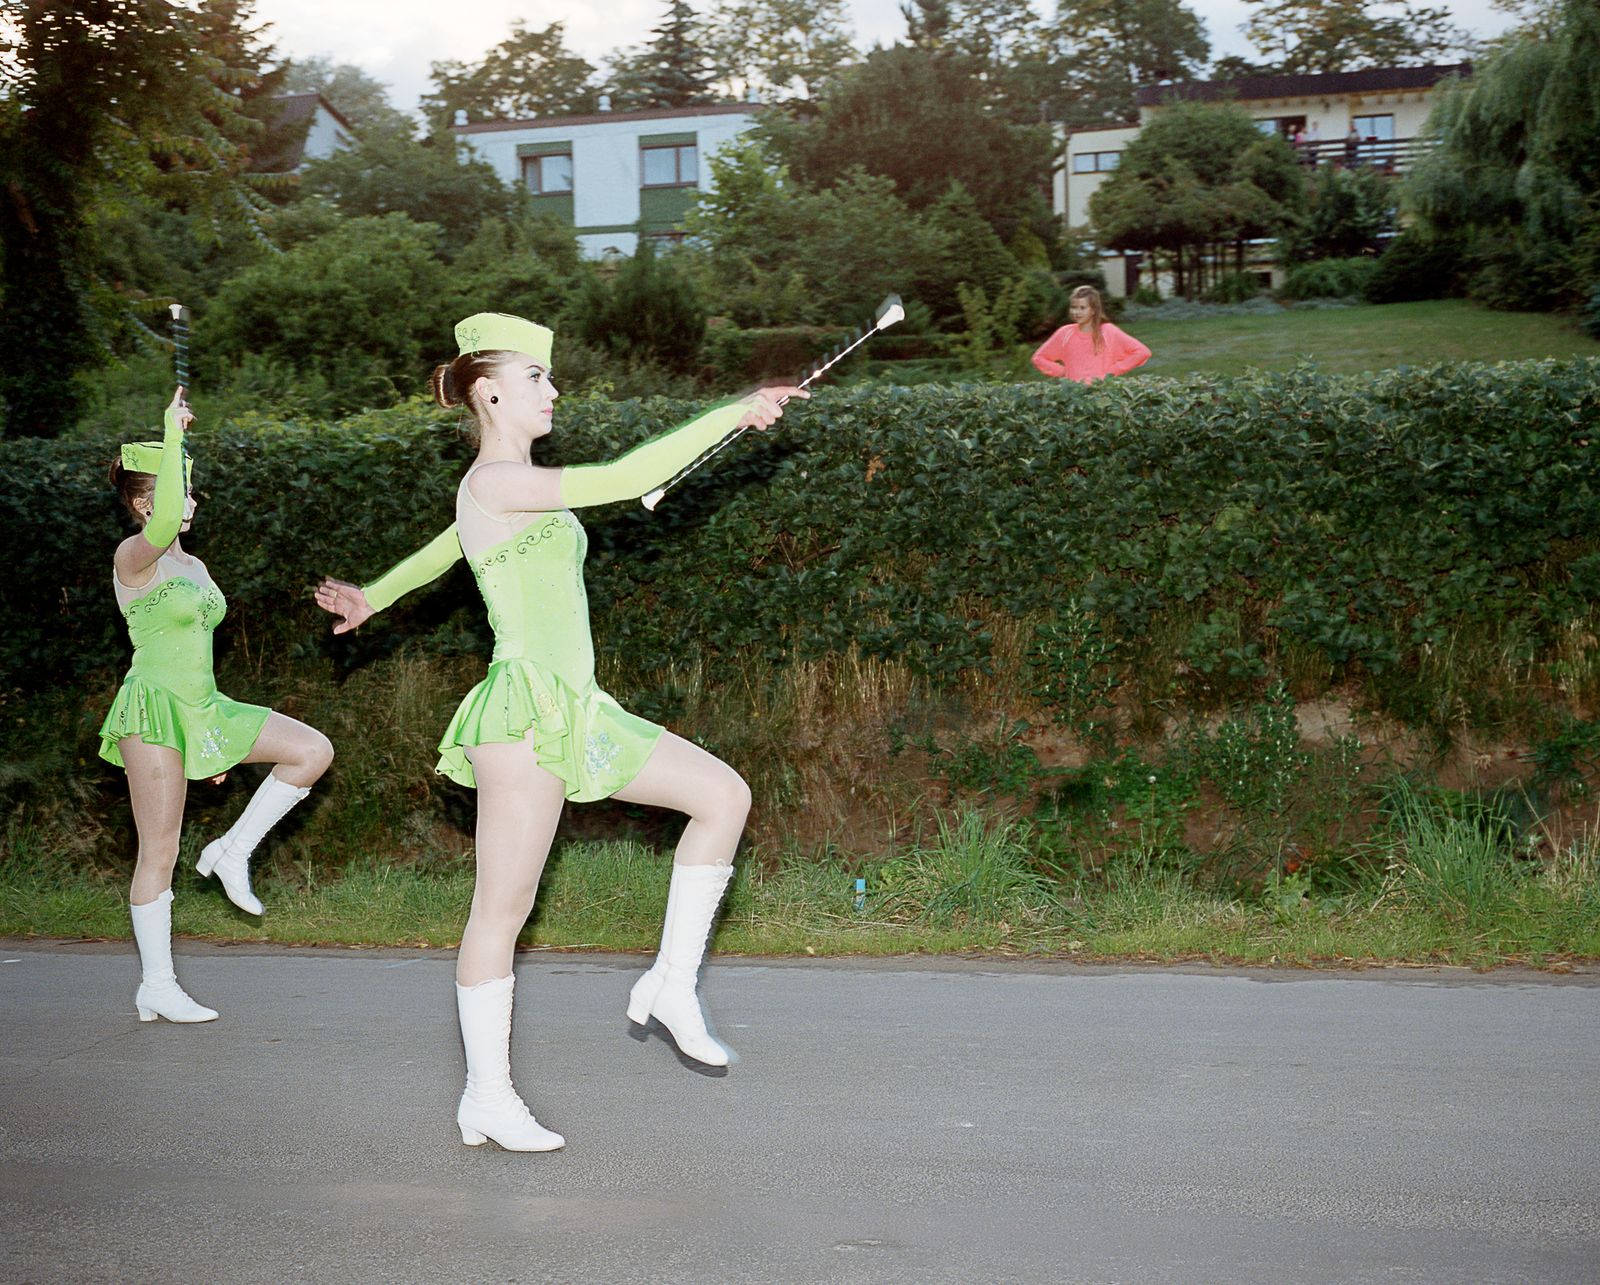 © Michal Adamski - The performance of majorettes during the Midsummer festival.